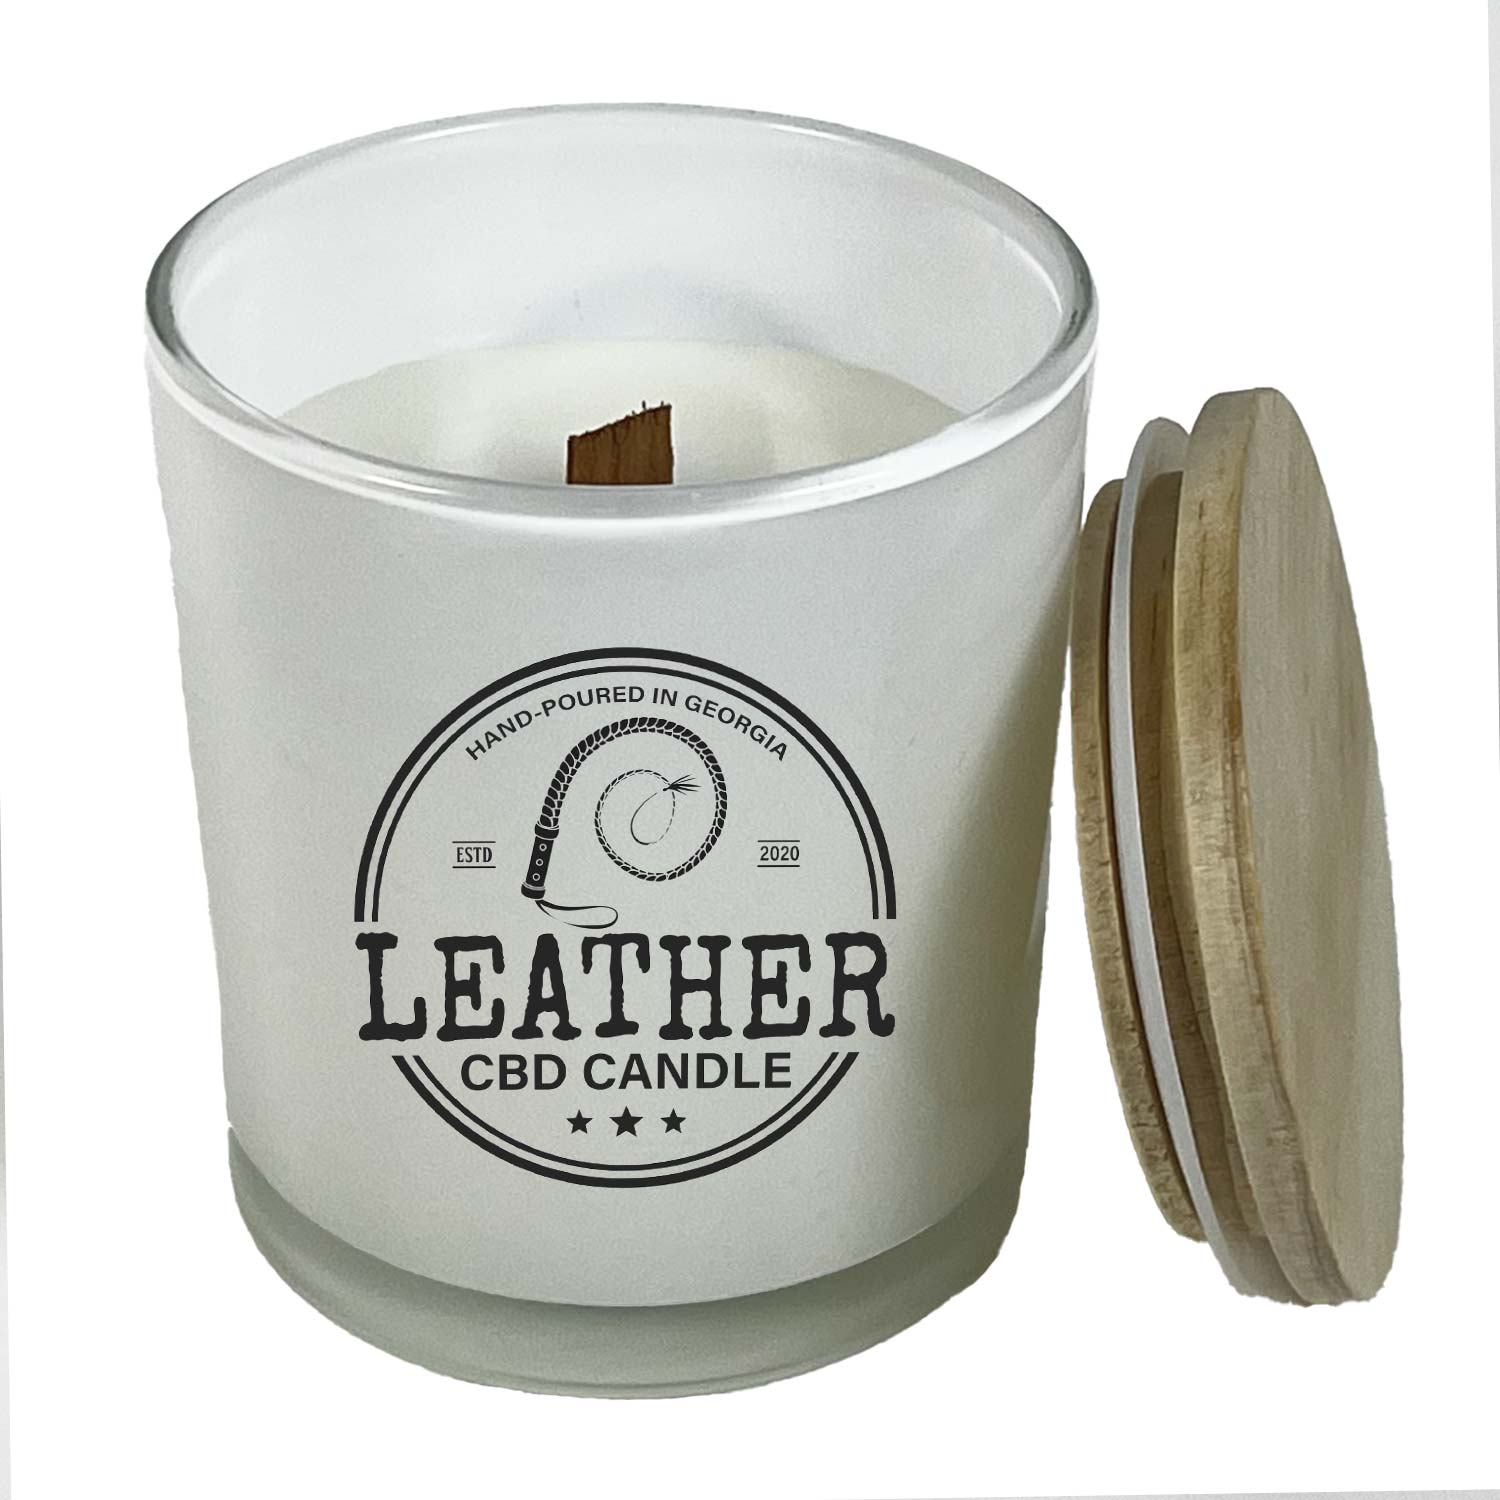 Leather CBD Candles | 700mg - For stress and calm | Broad Essentials